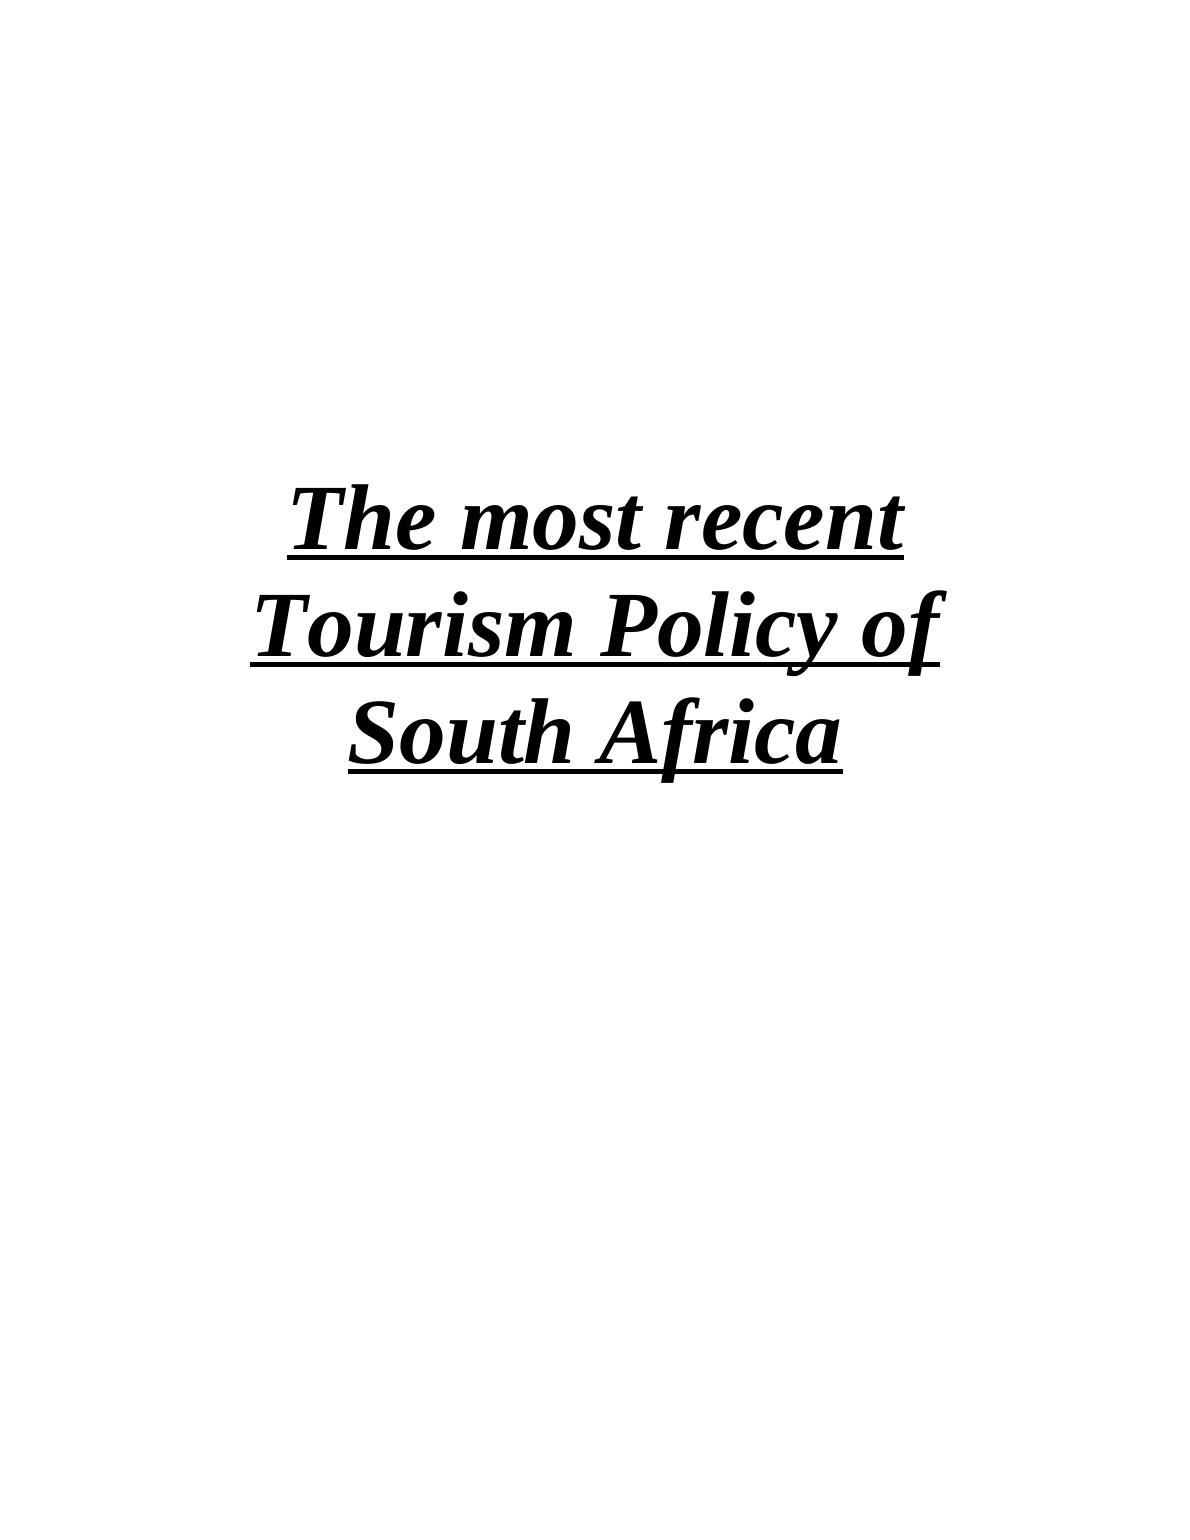 Tourism Policy of South Africa_1